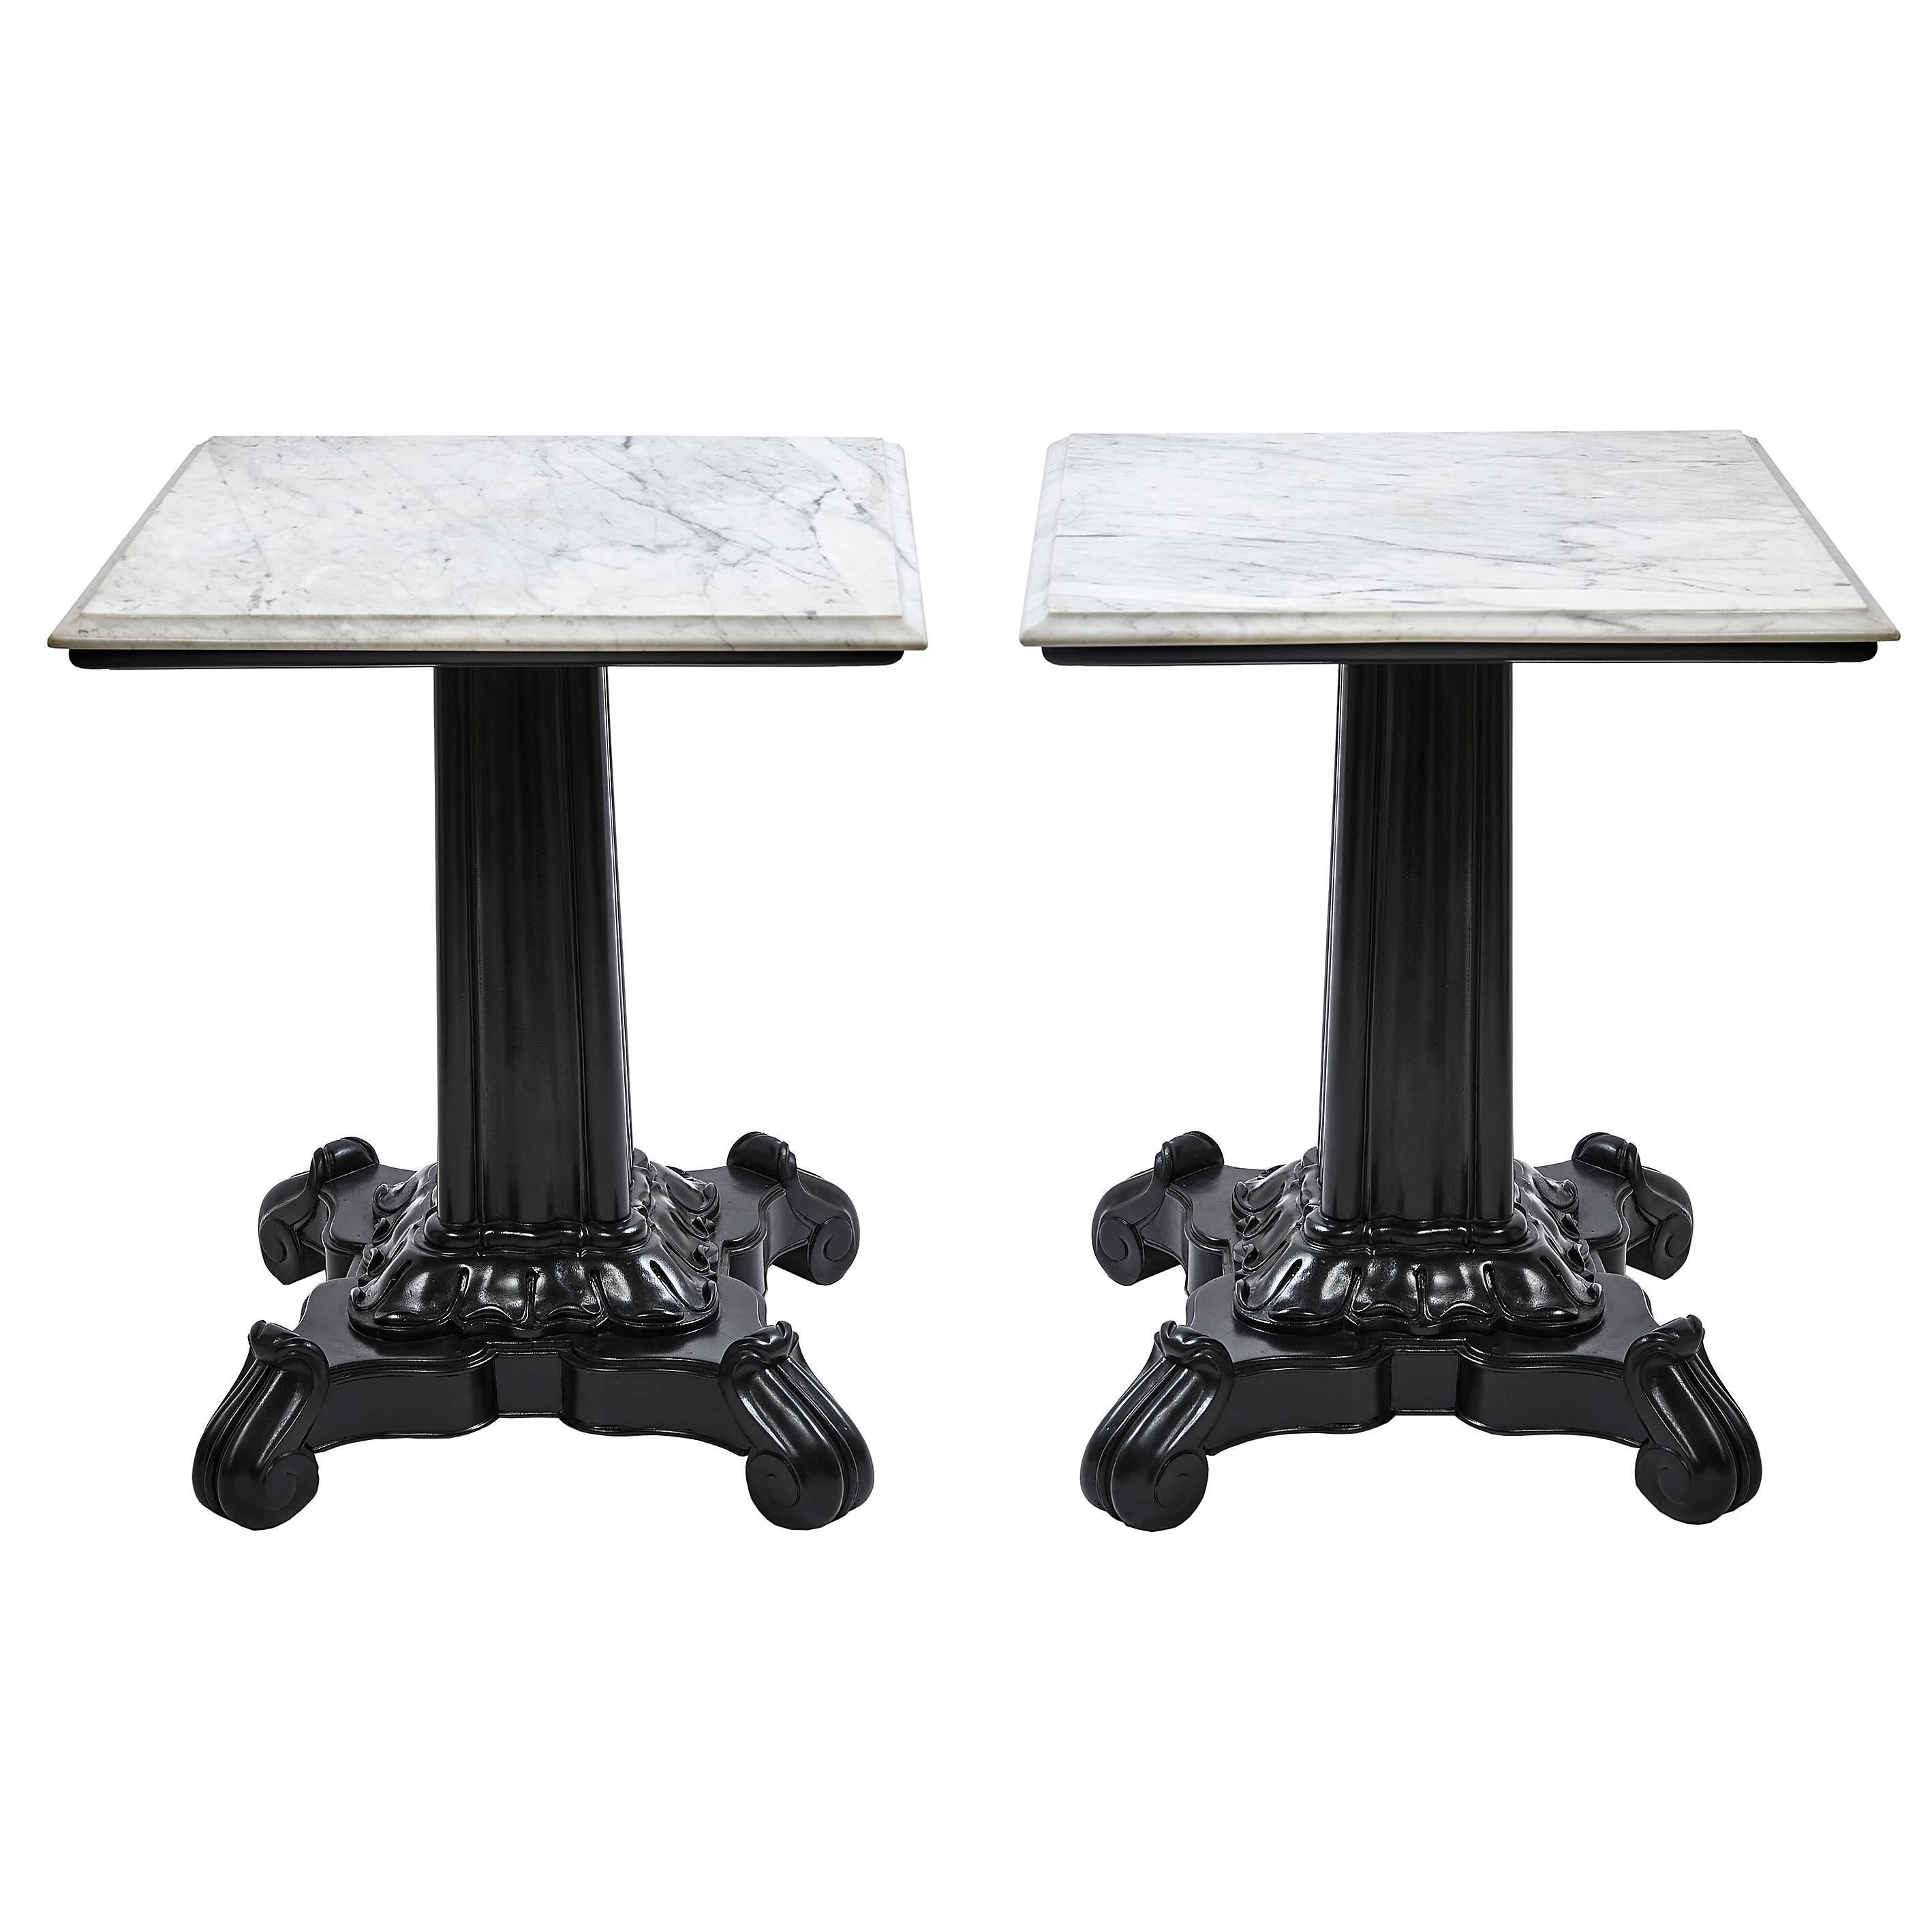 Pair of Ebonized Rosewood and White Marble Anglo-Indian Pedestal Side Tables